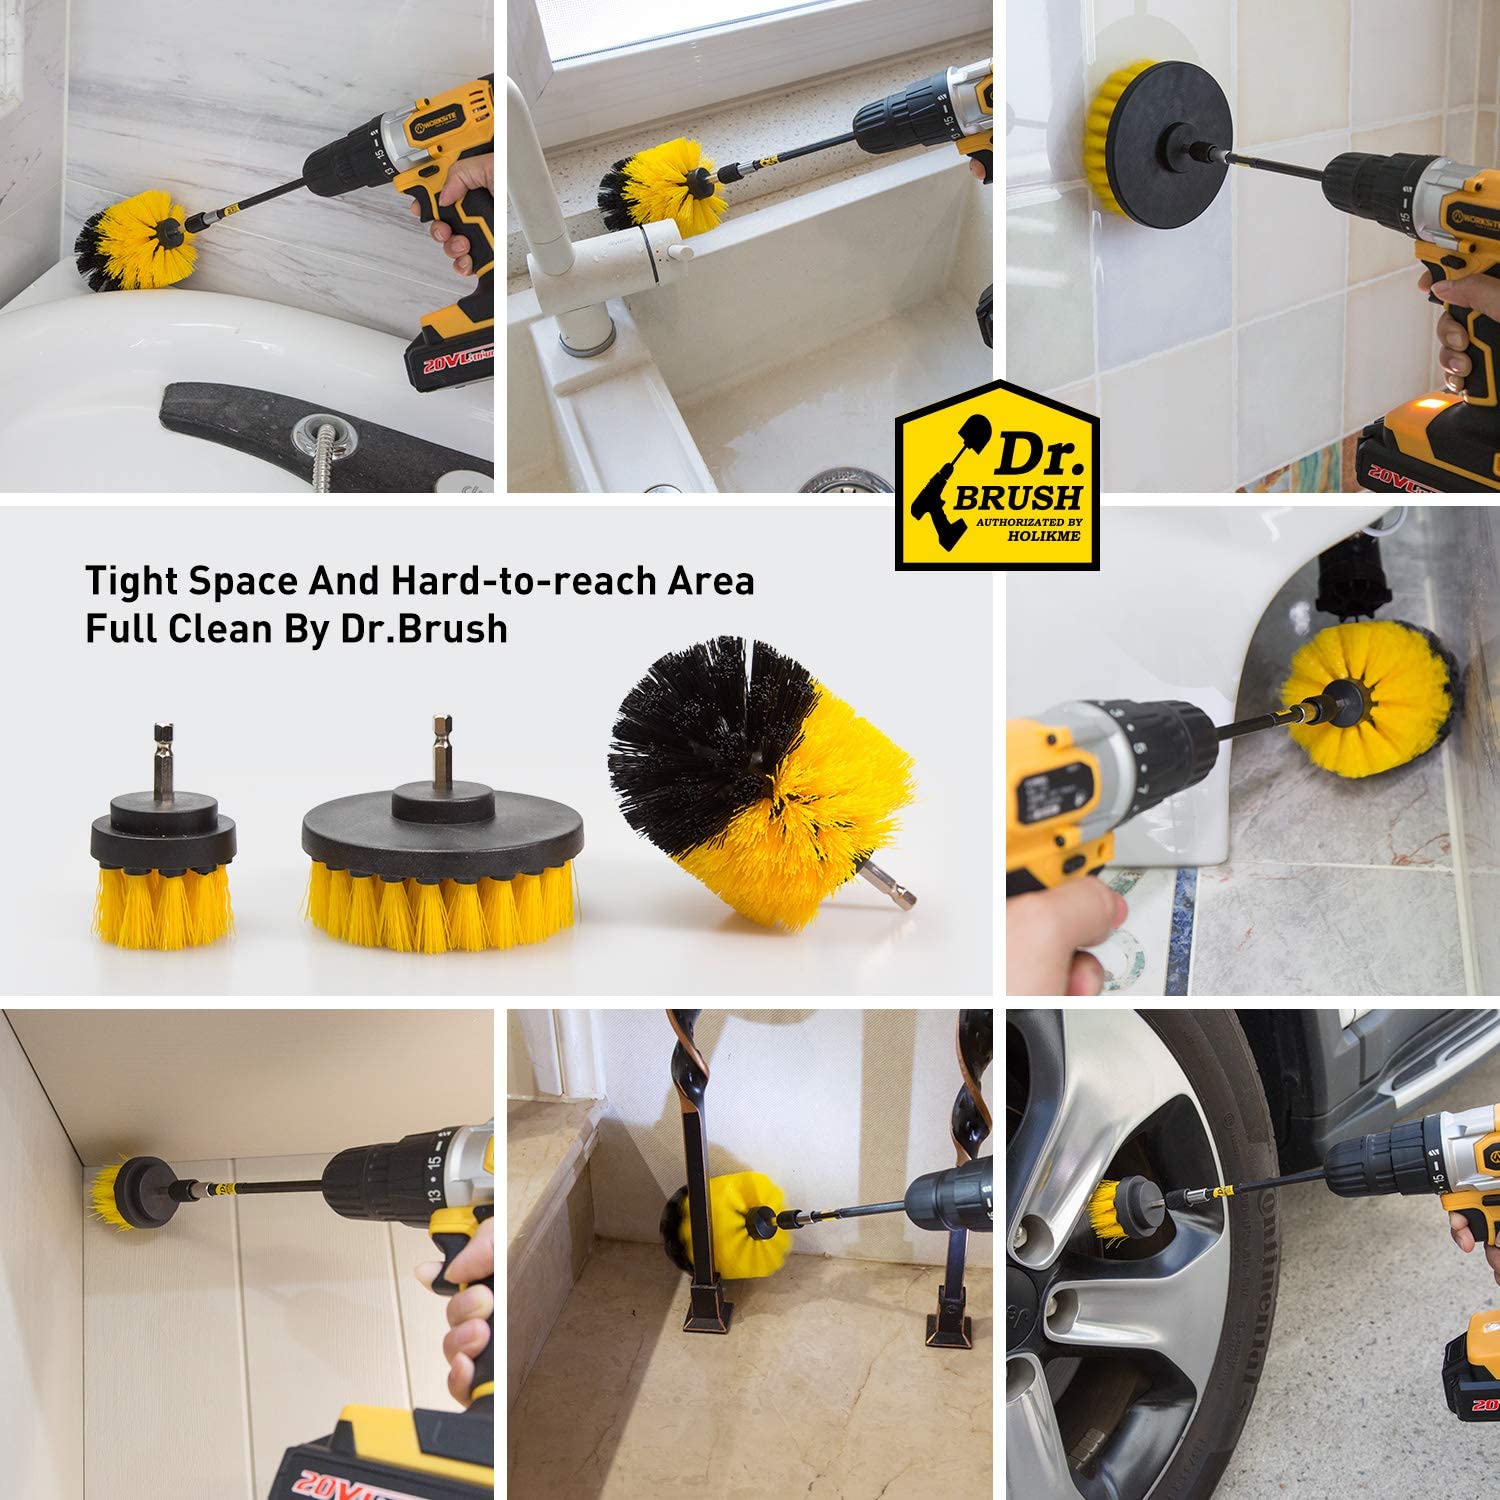 Drill Brush Attachment Set, Power Scrubber Wash Cleaning Brushes